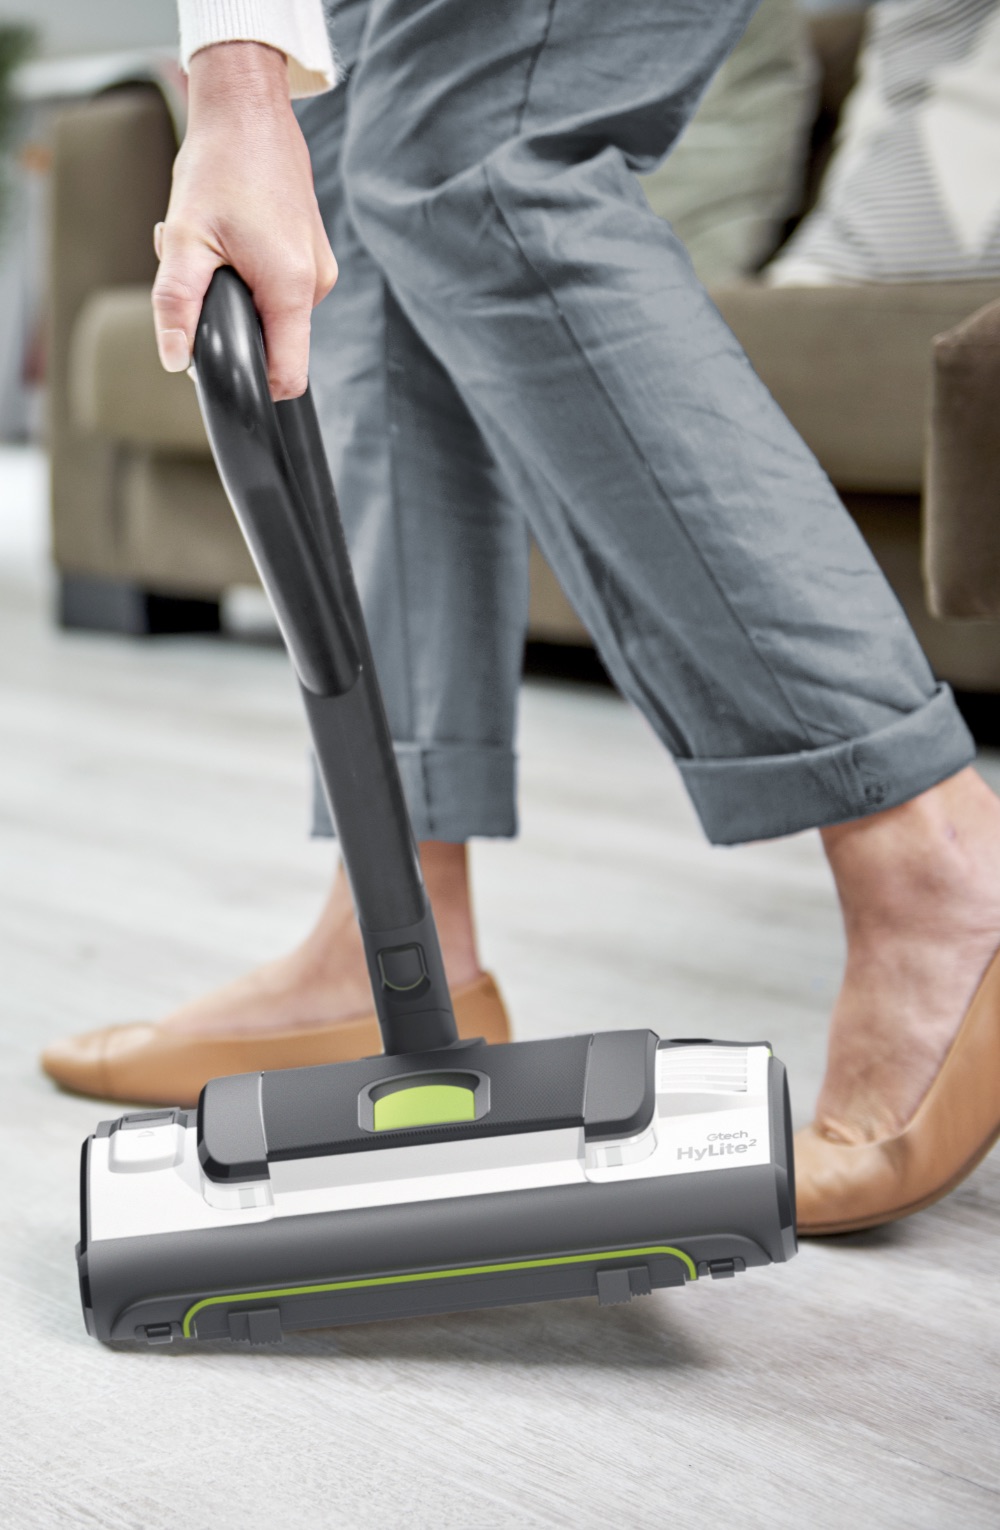 HyLite 2 compact vacuum cleaner